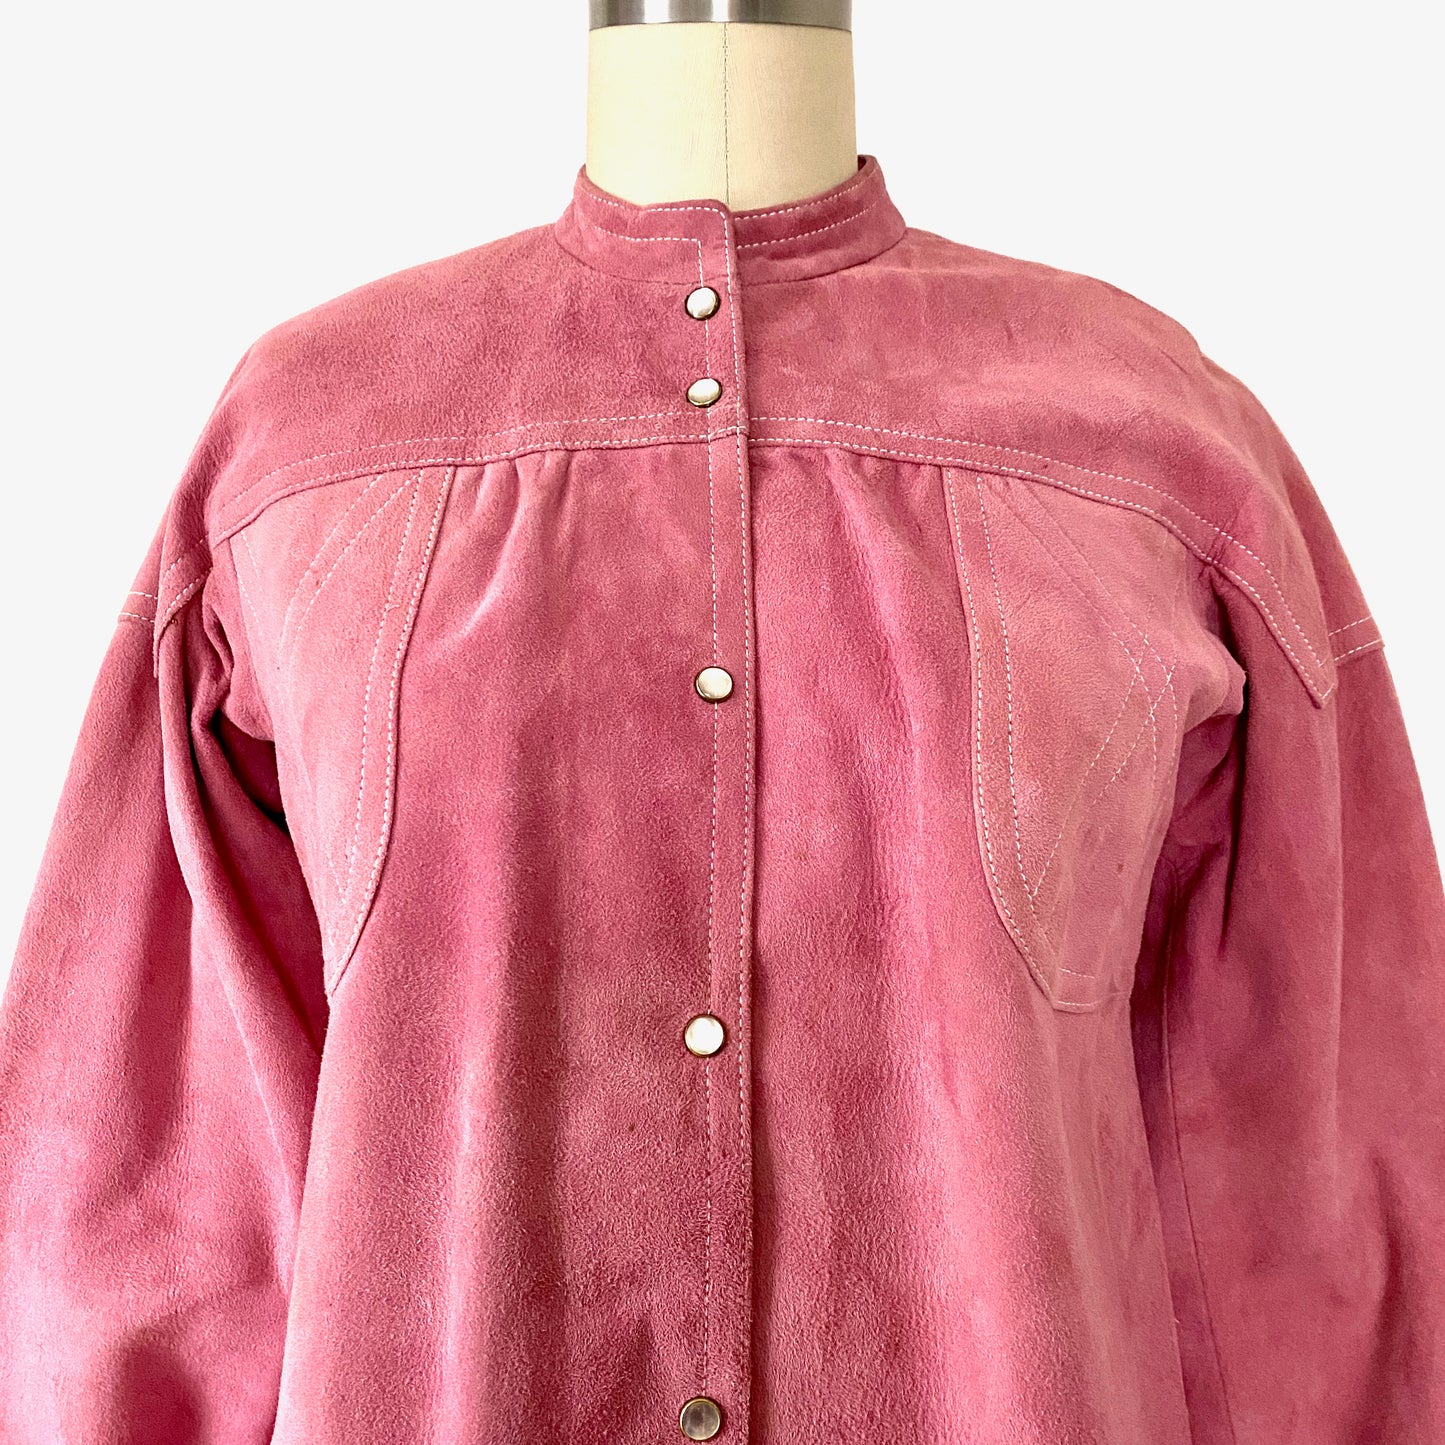 1970s Bonnie Cashin for Sills Suede Snap Front Jacket 6/8